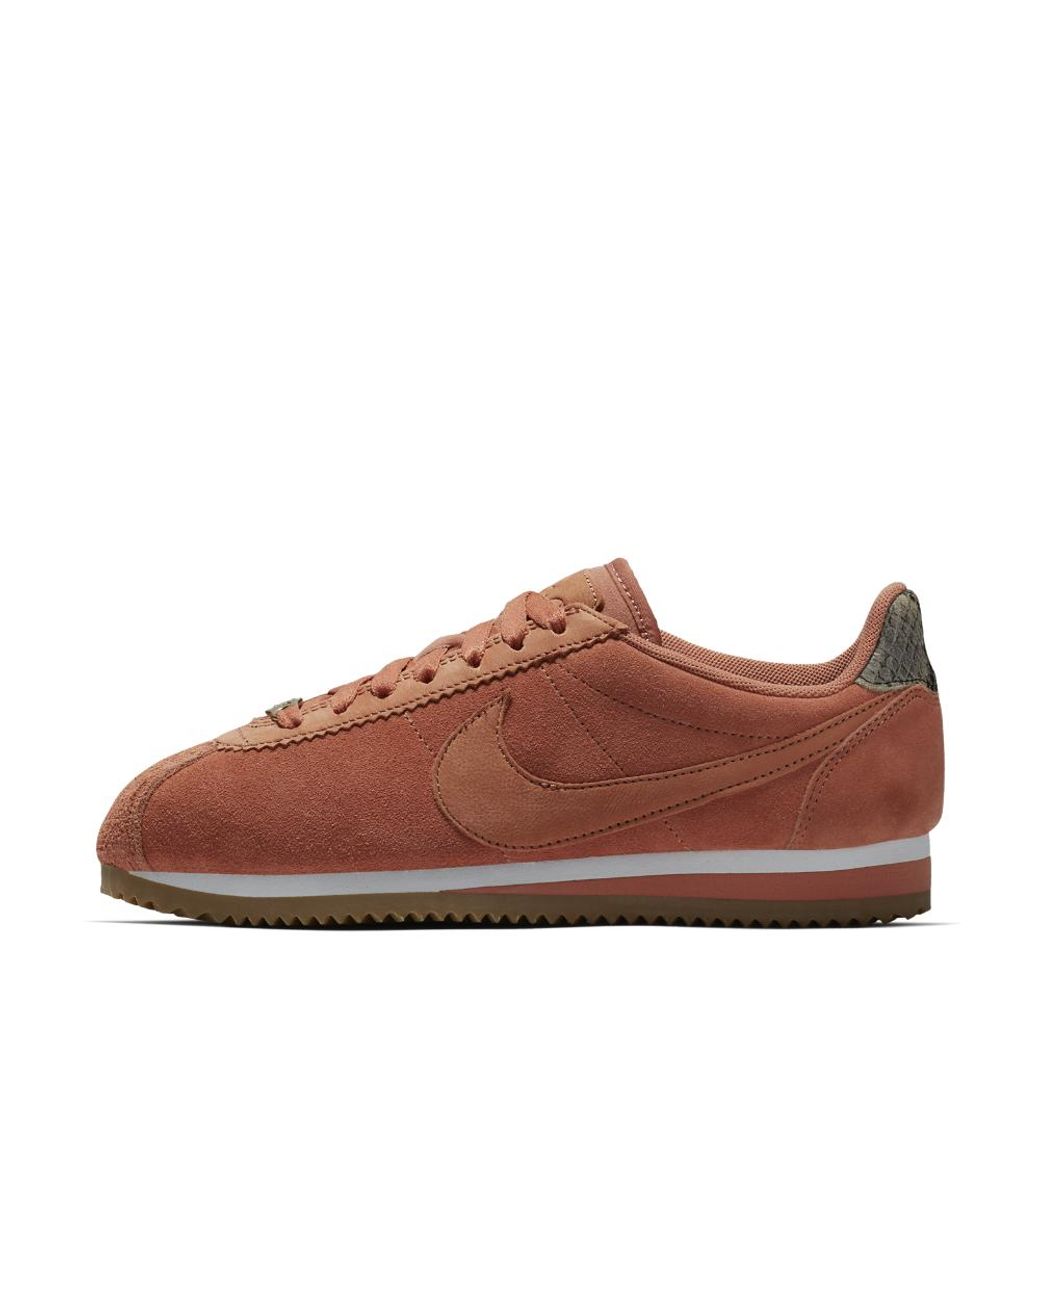 Nike Leather Classic Cortez Premium Women's Shoe in Brown | Lyst